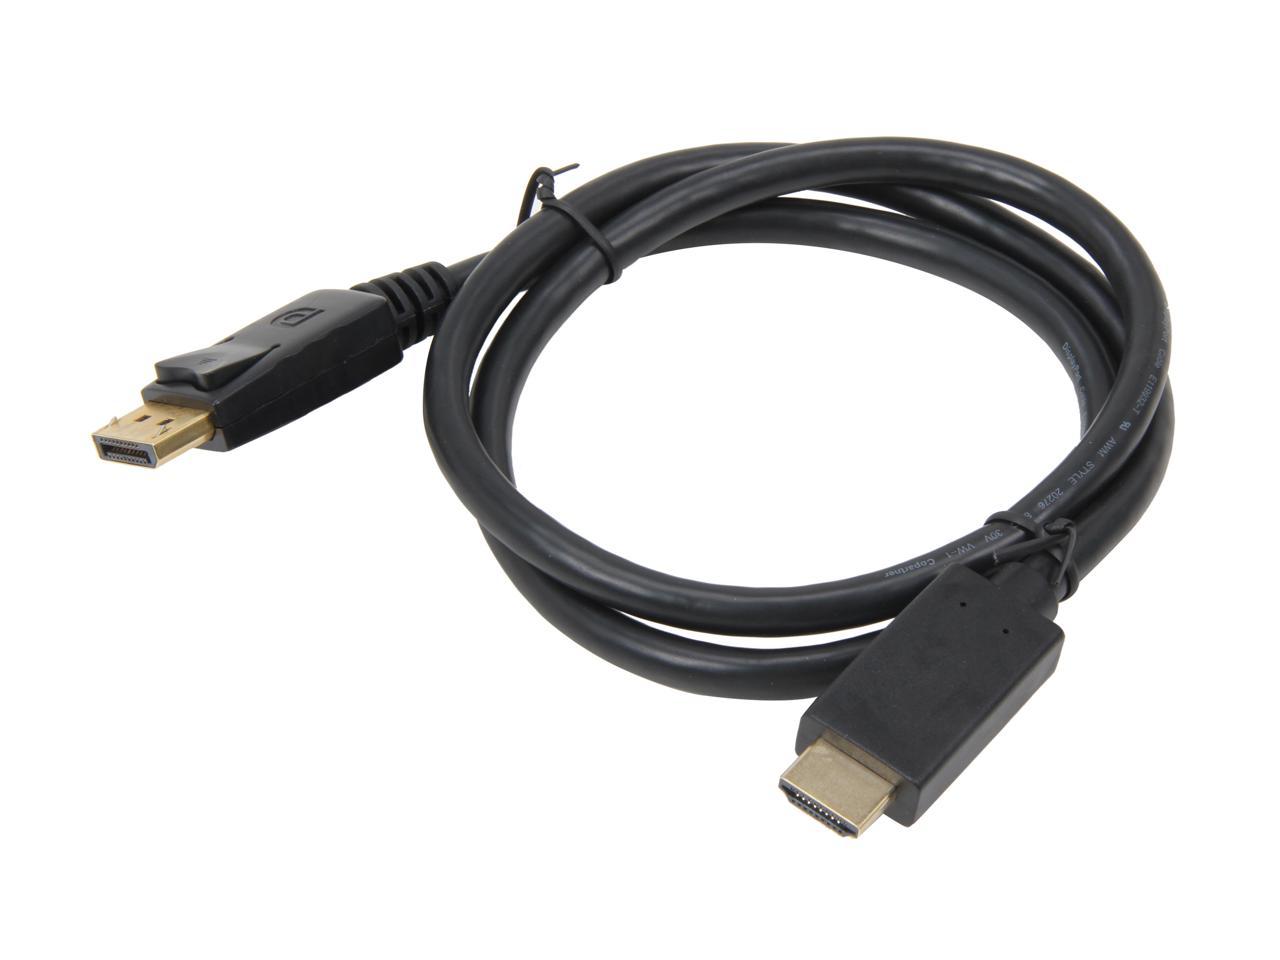 Nippon Labs DP-HDMI-3 3 ft. DisplayPort to HDMI Converter Cable .